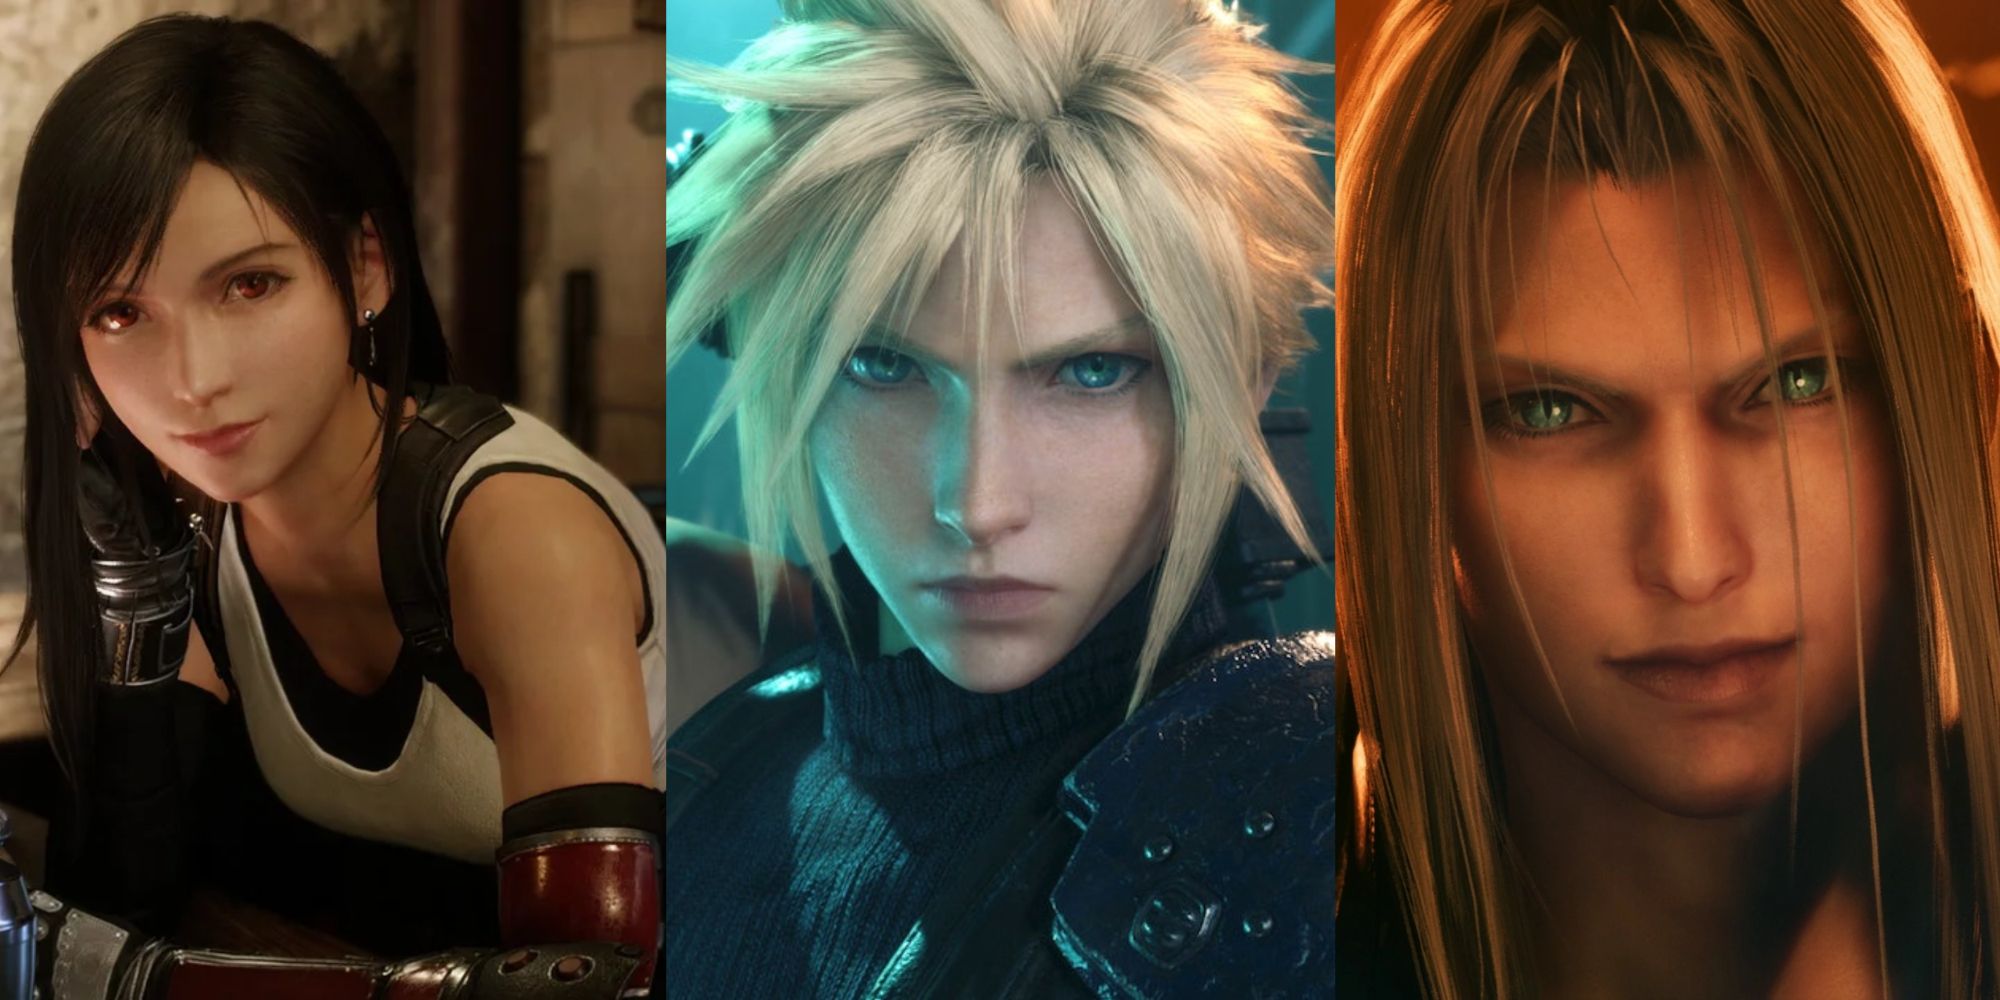 Final Fantasy 7: Every Main Character's Age, Height & Birthday